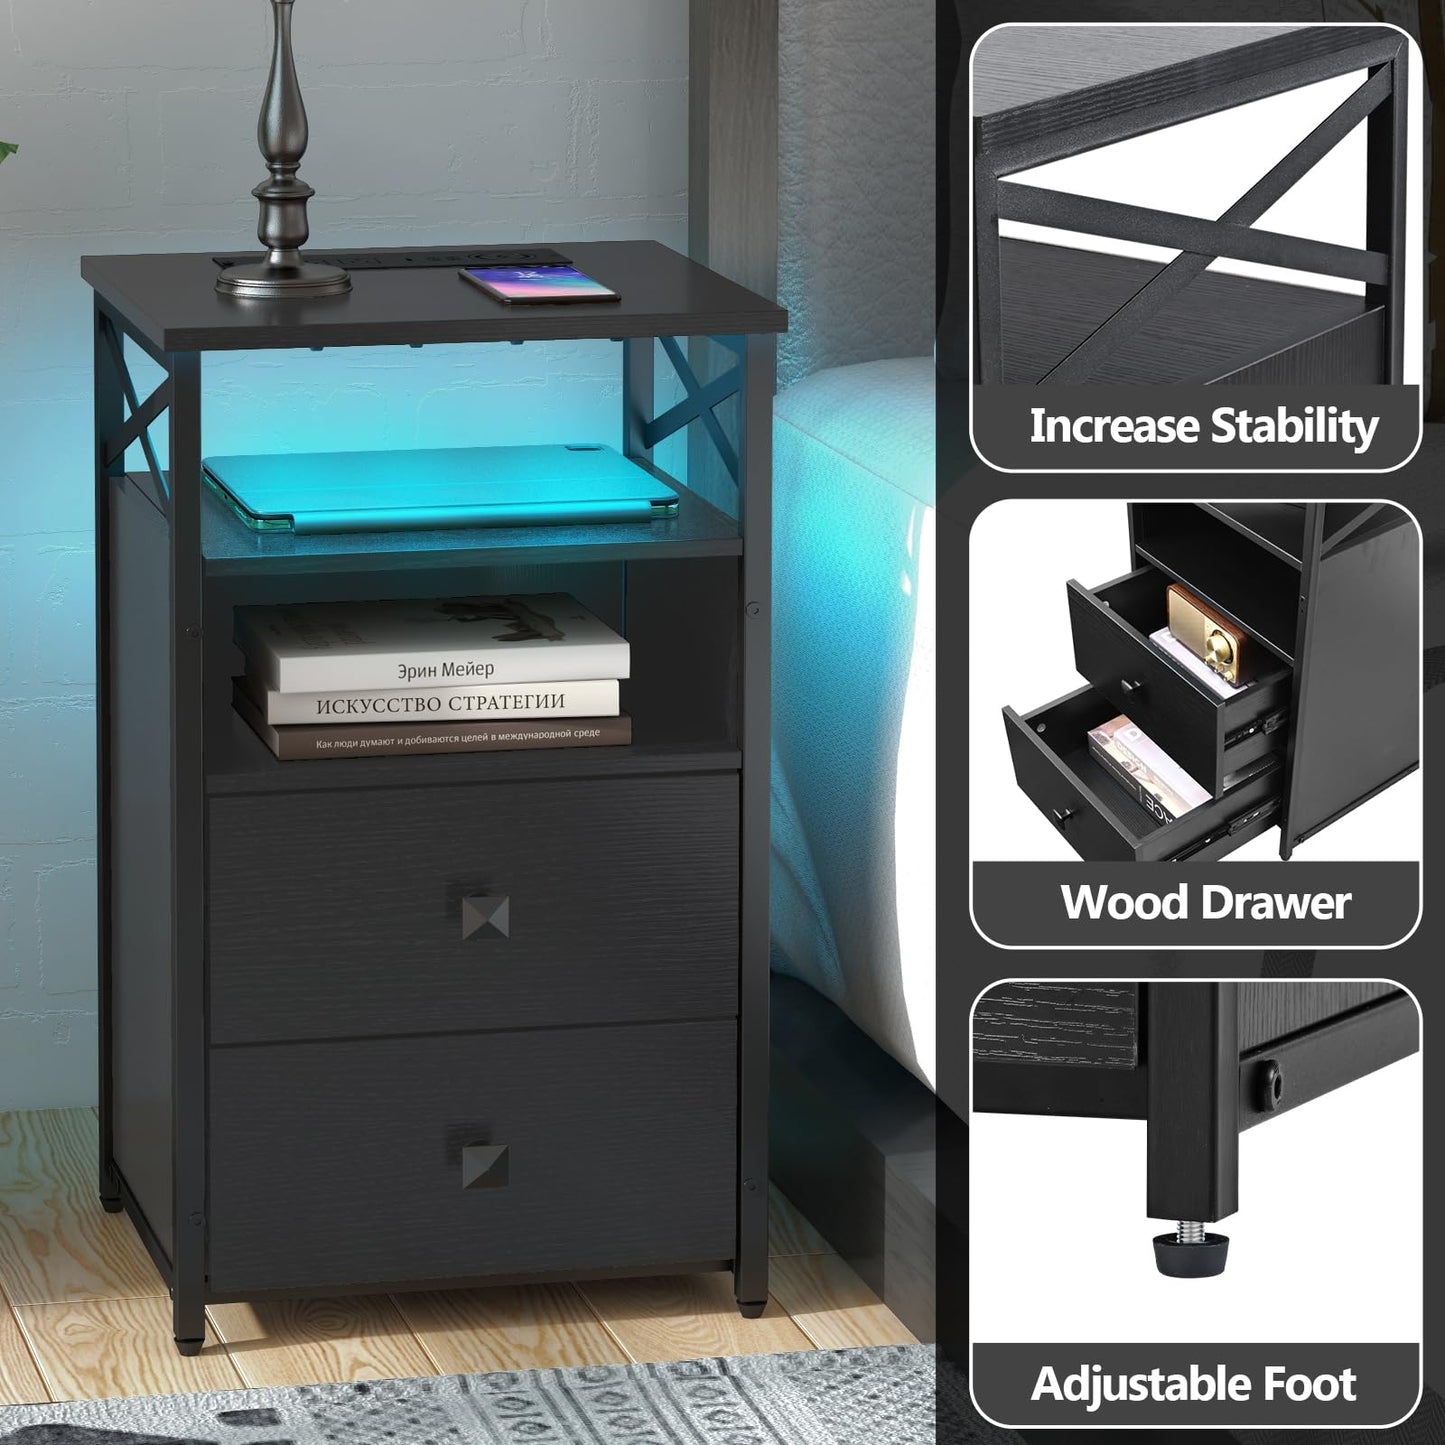 Livofloral LED Black End Table with Charging Station Set of 2, Nightstands Set of 2 with LED Light and Wireless Charger, Bedside Table with Wooden Drawers, Storage Night Stands for Bedrooms Set of 2